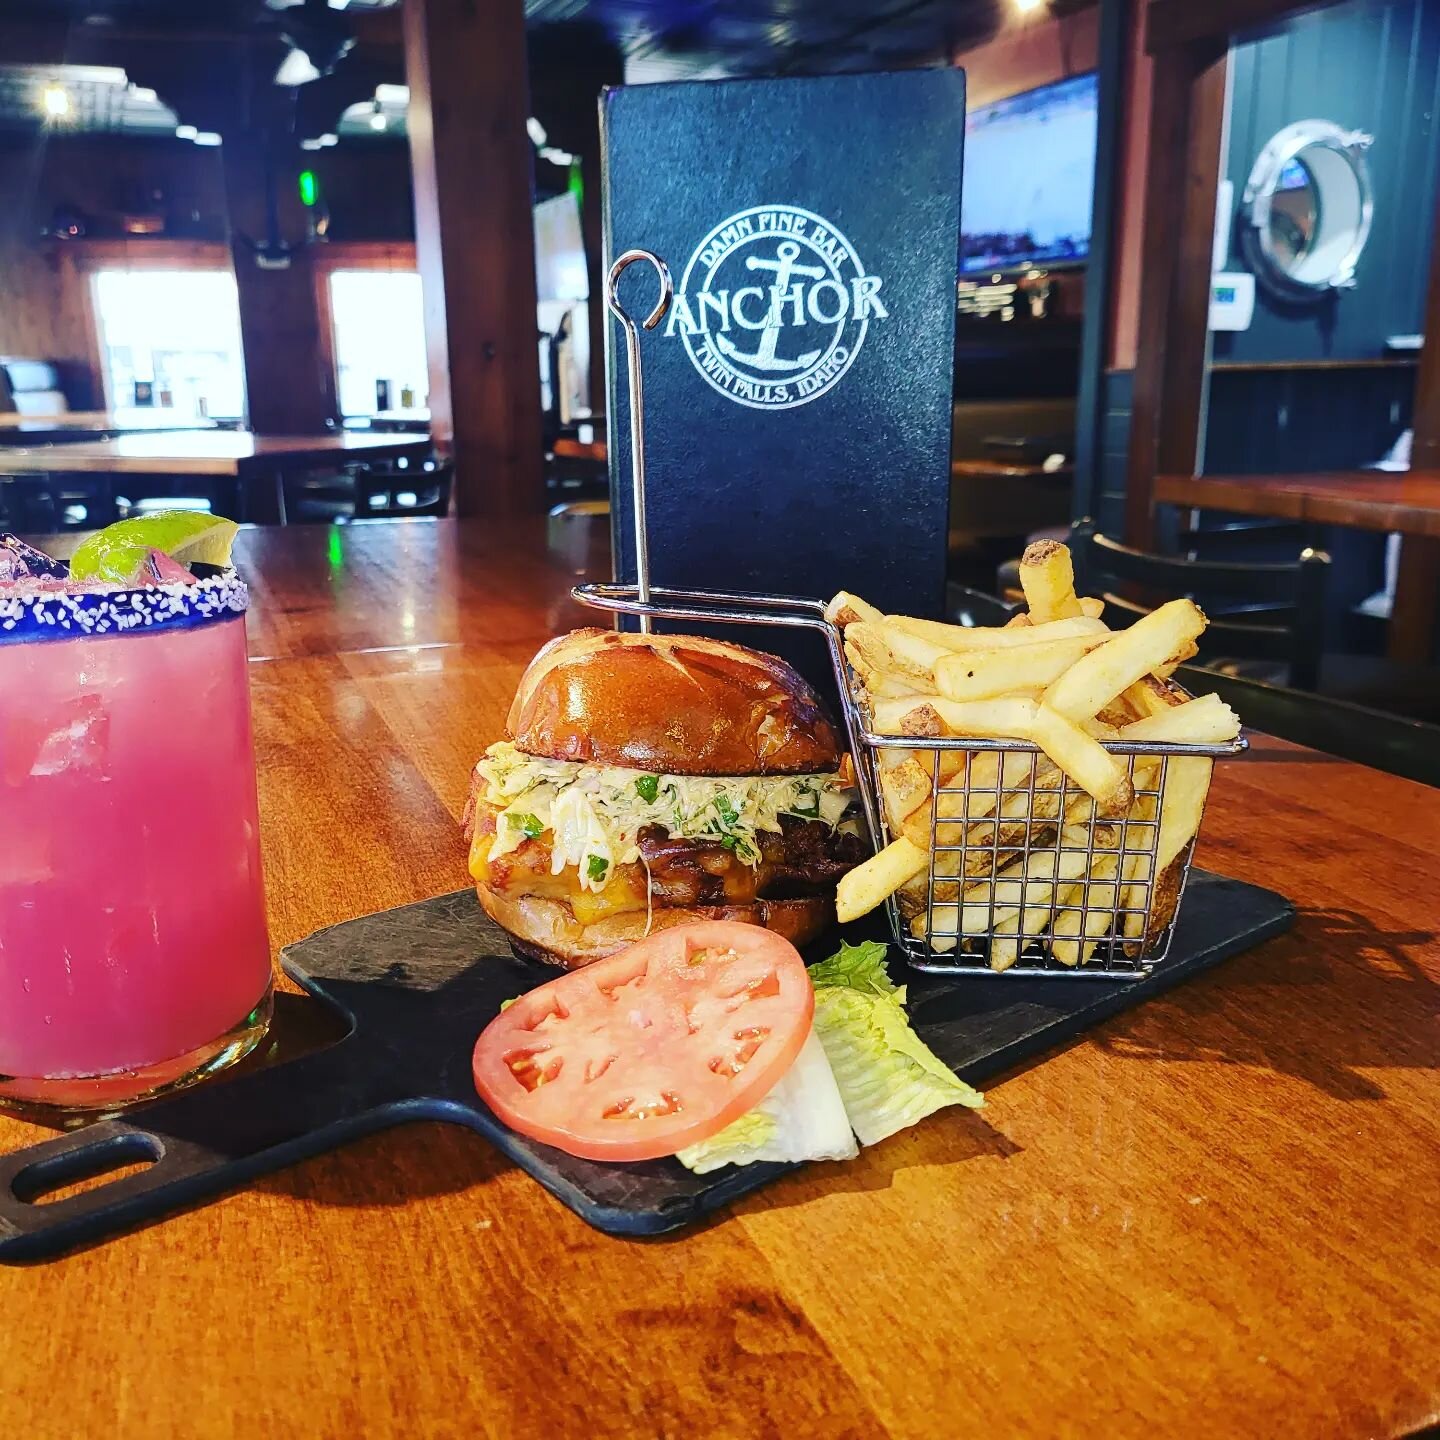 A little desert, a little coastal, all delicious!
Come try our Fried Fish Sando paired with Desert Pear Margarita!